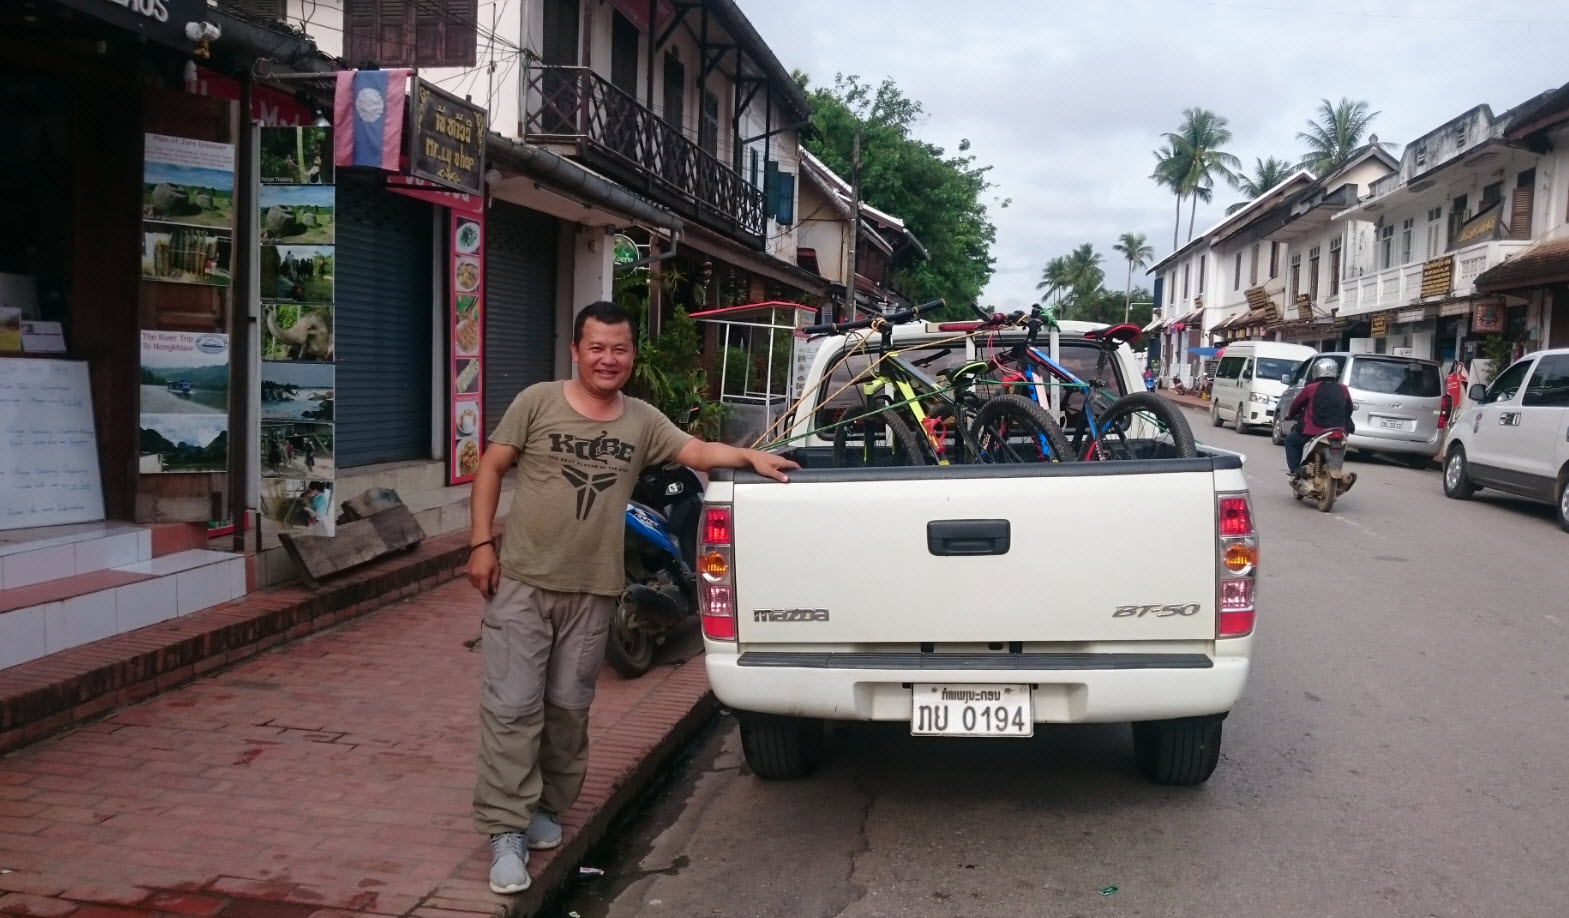 Phai with a pickup suport on bicycle tour